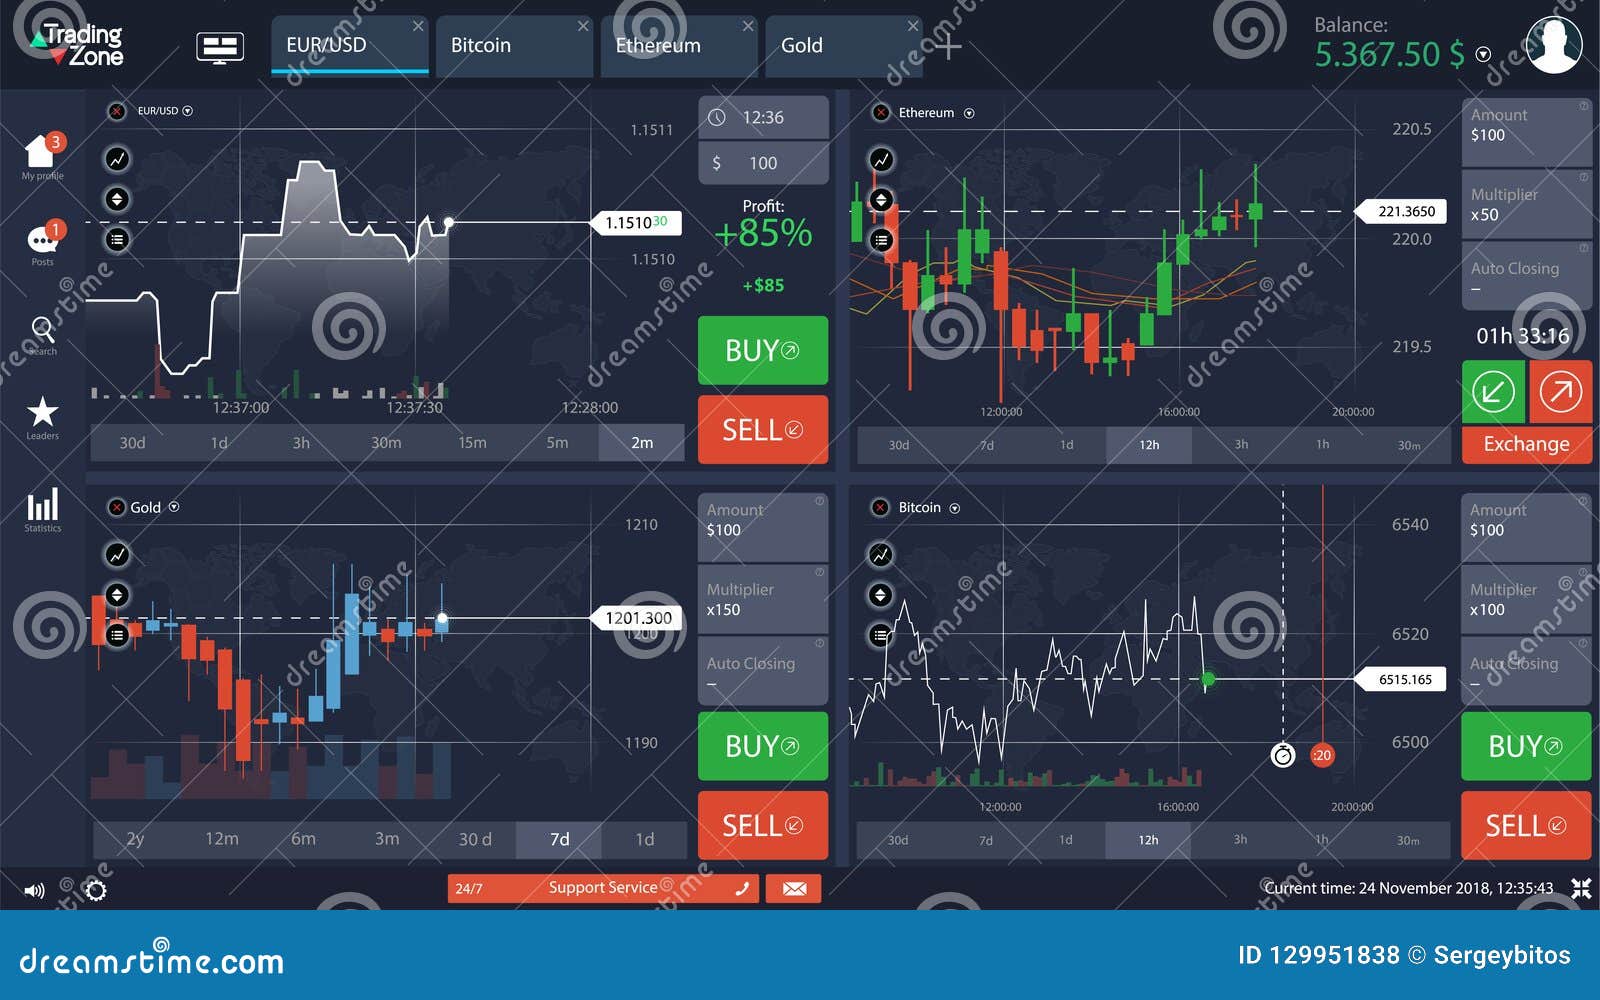 Binary options trading real time charts